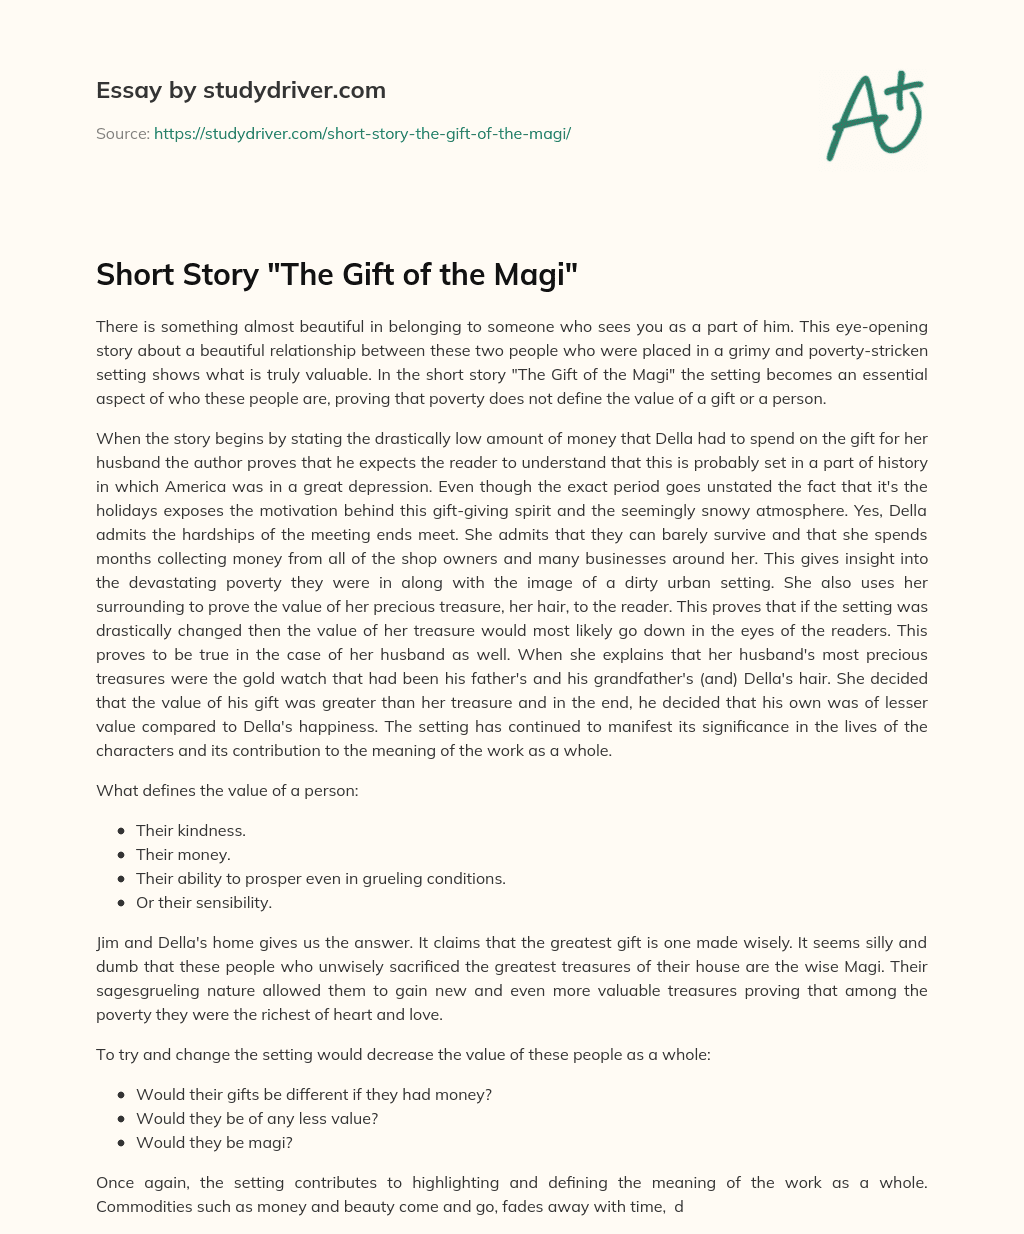 Short Story “The Gift of the Magi” essay